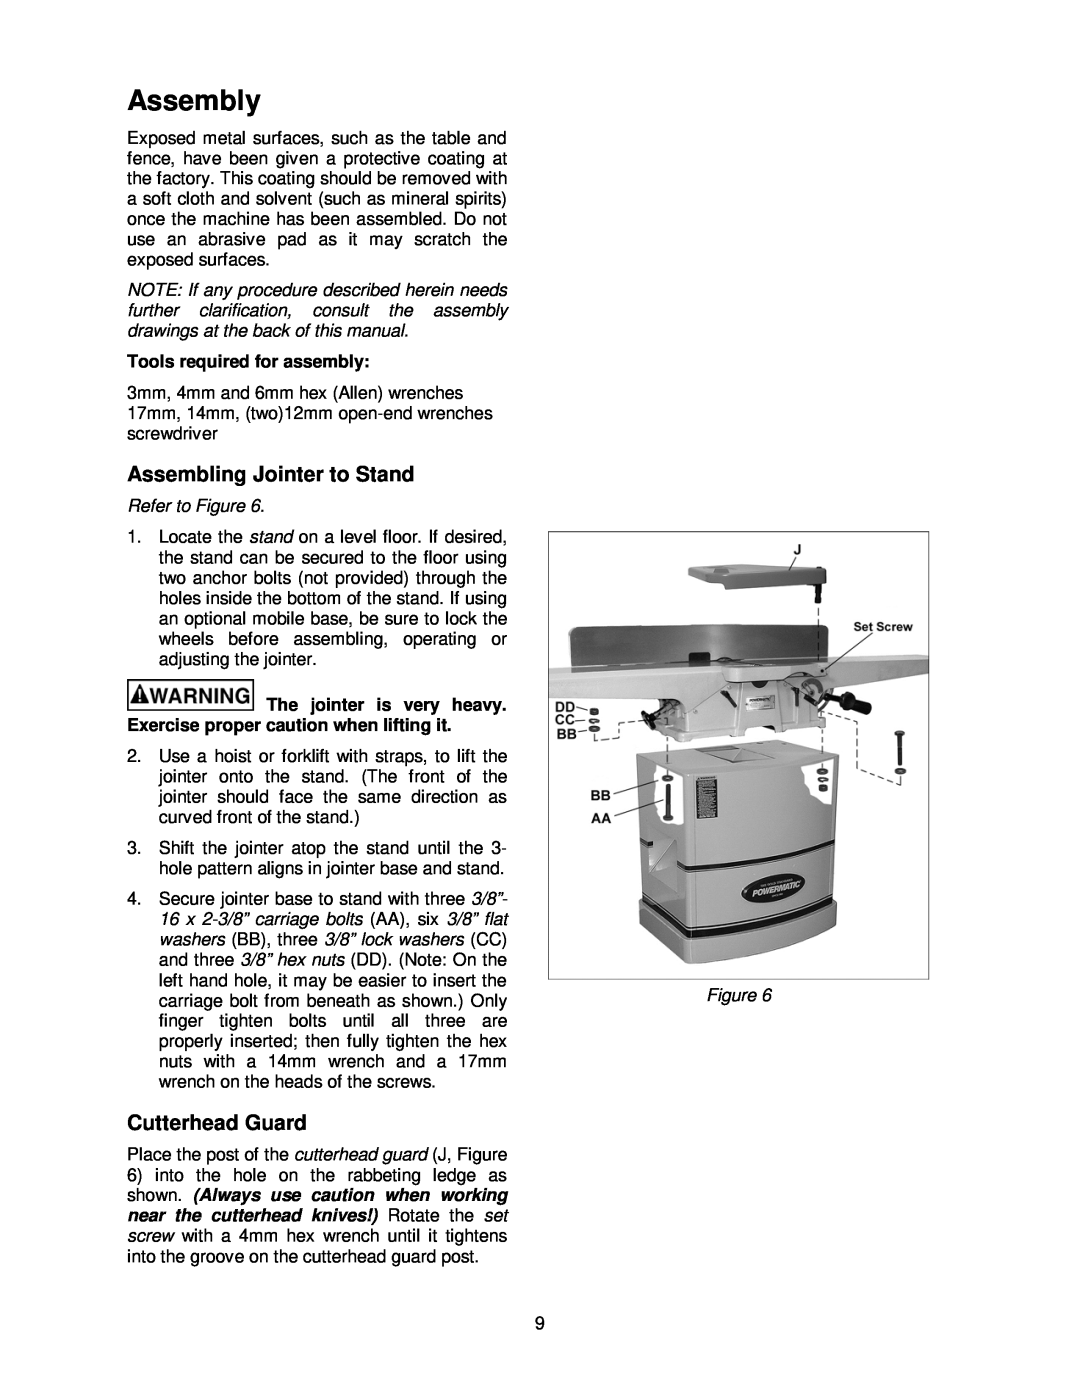 Powermatic 60HH, 60C Assembly, Assembling Jointer to Stand, Cutterhead Guard, Tools required for assembly, Refer to Figure 